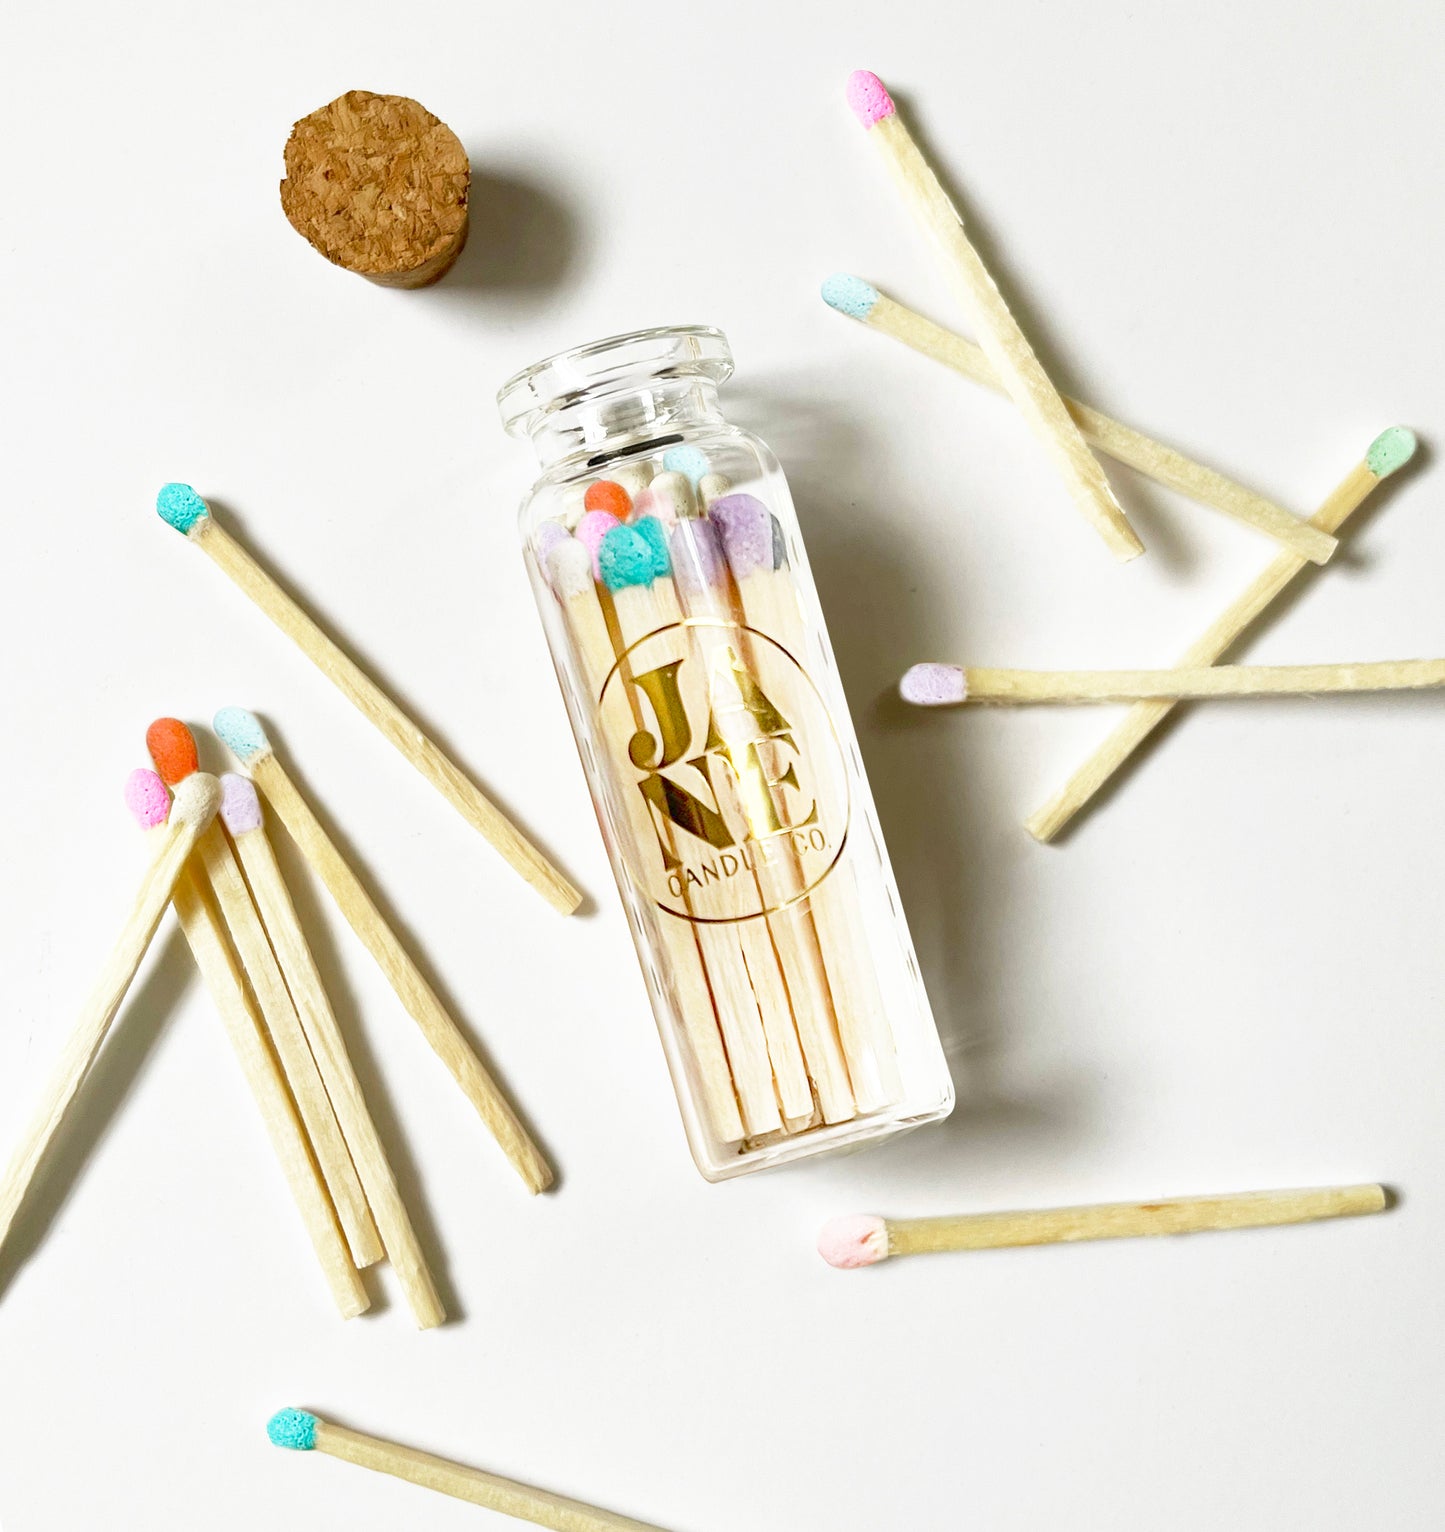 Jane Candle Co matchstick vial